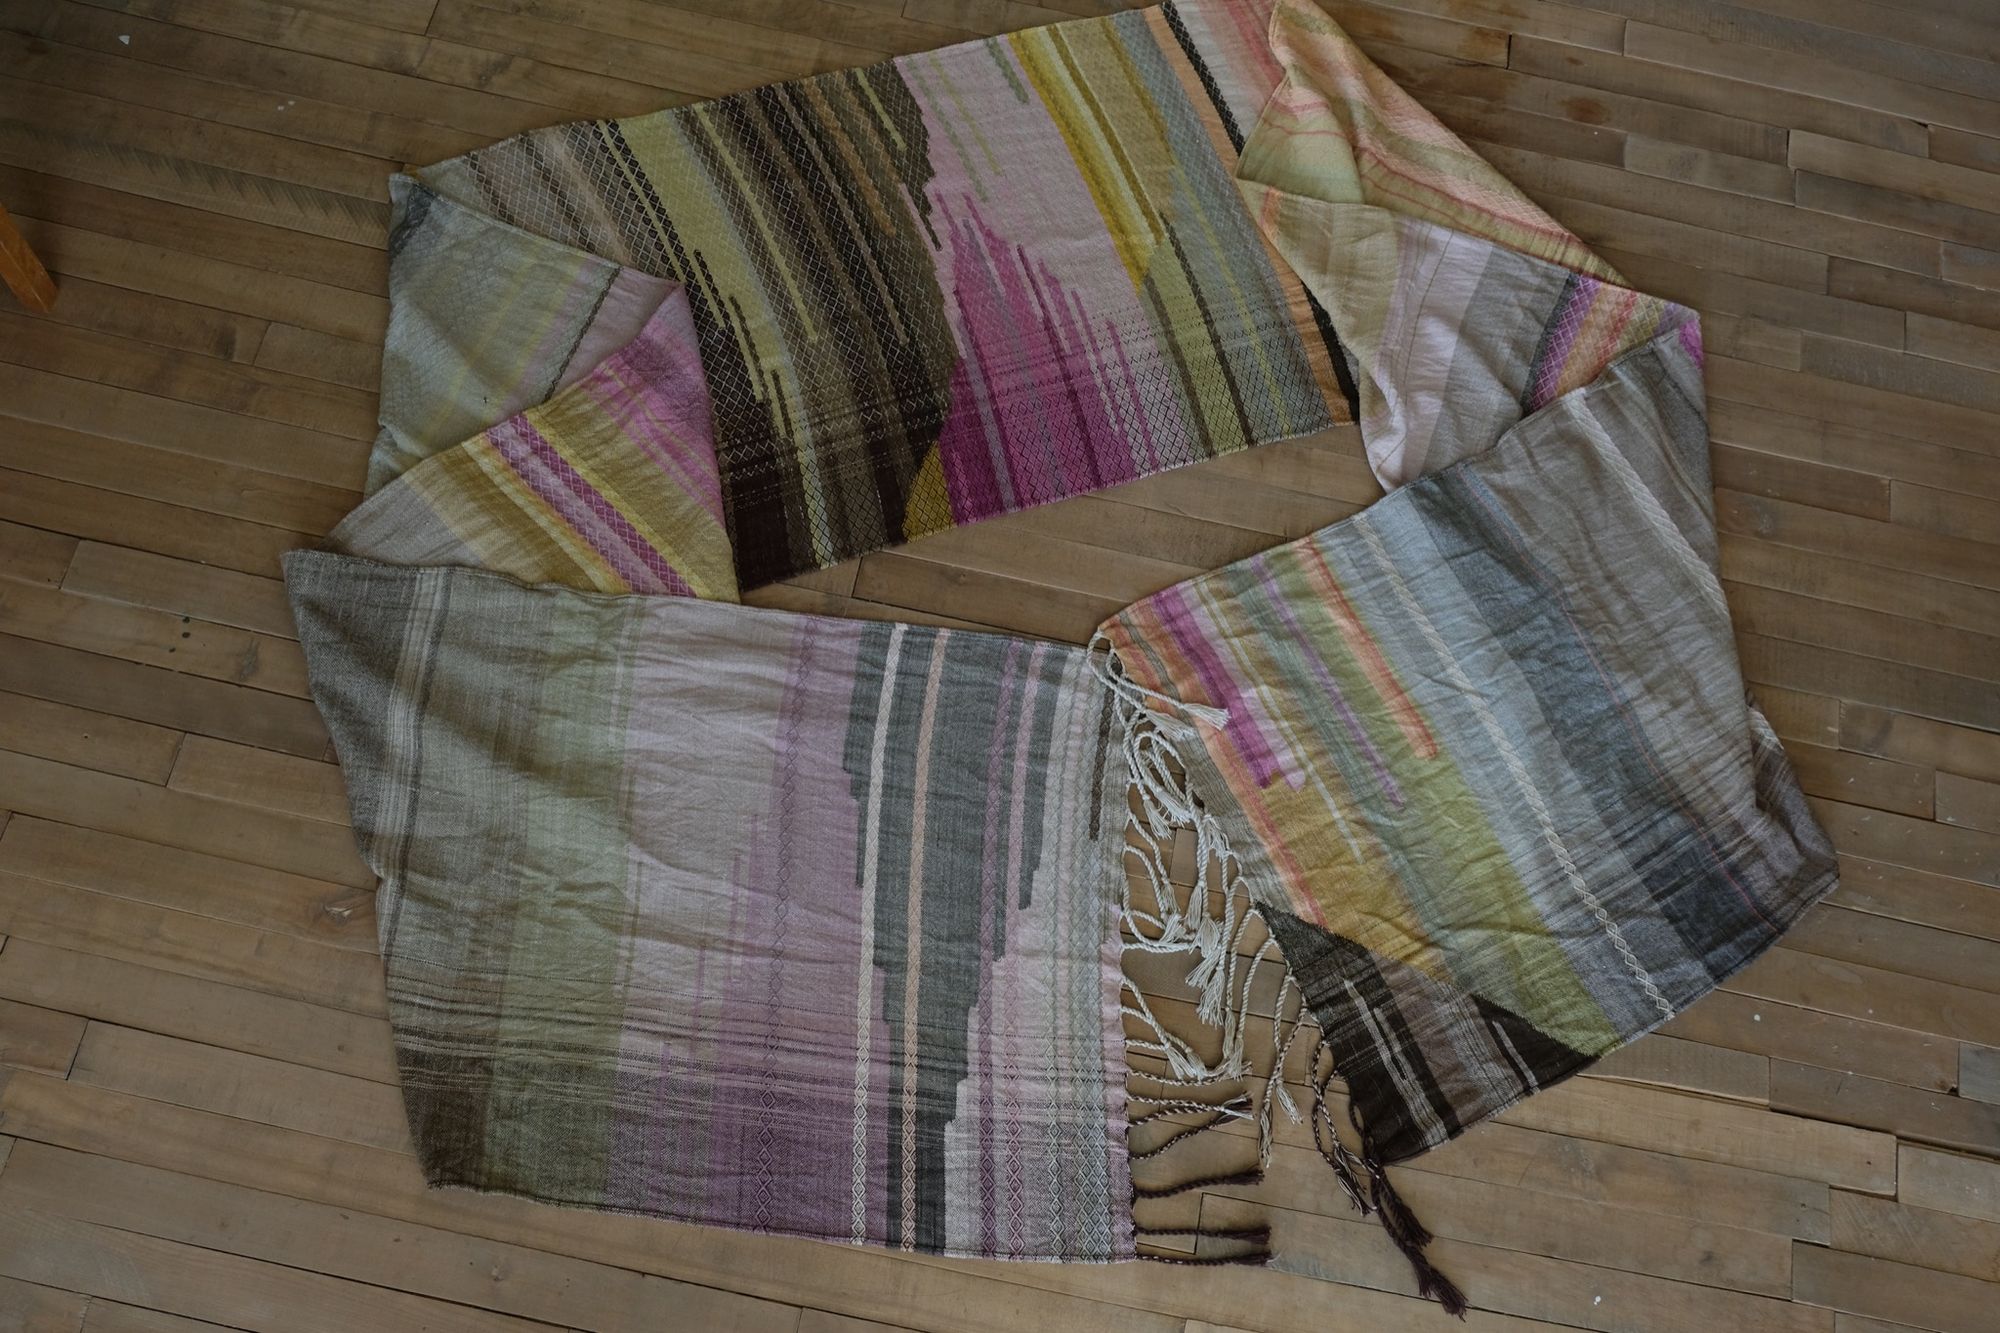 A long length of handwoven fabric with a diamond pattern in a naturally dyed rainbow of color, brown, grey, pink, purple, yellow, green, orange and lavender lays on a wooden floor